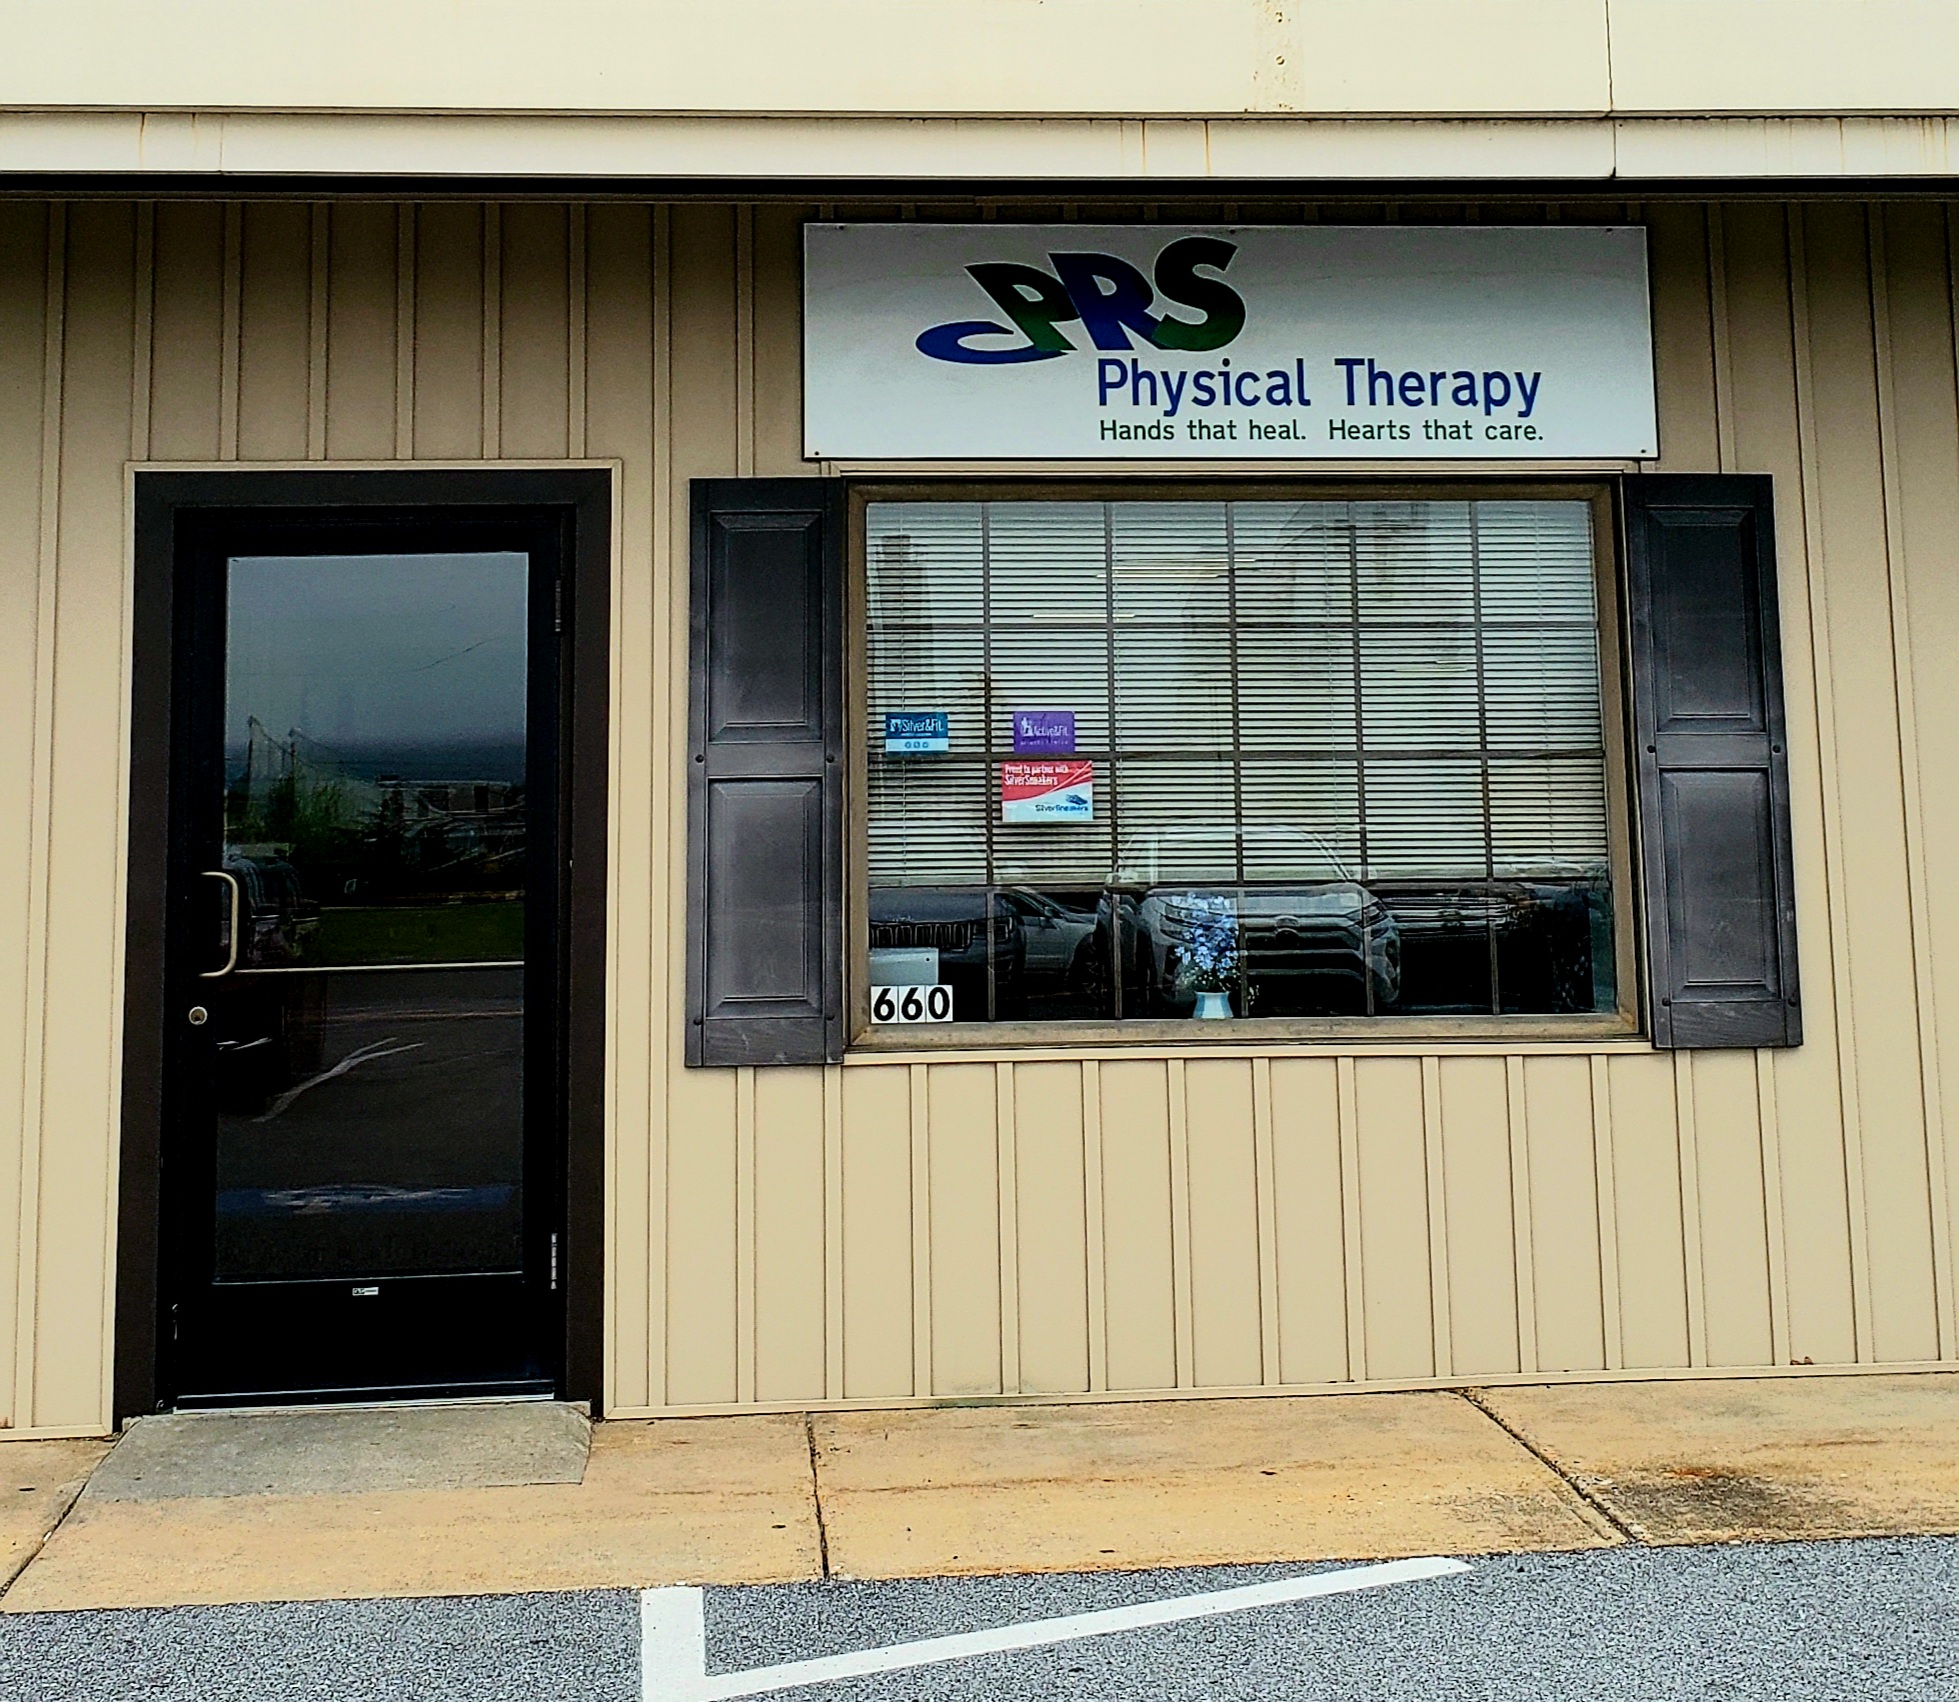 CPRS Physical Therapy 660 E Main St, New Holland Pennsylvania 17557